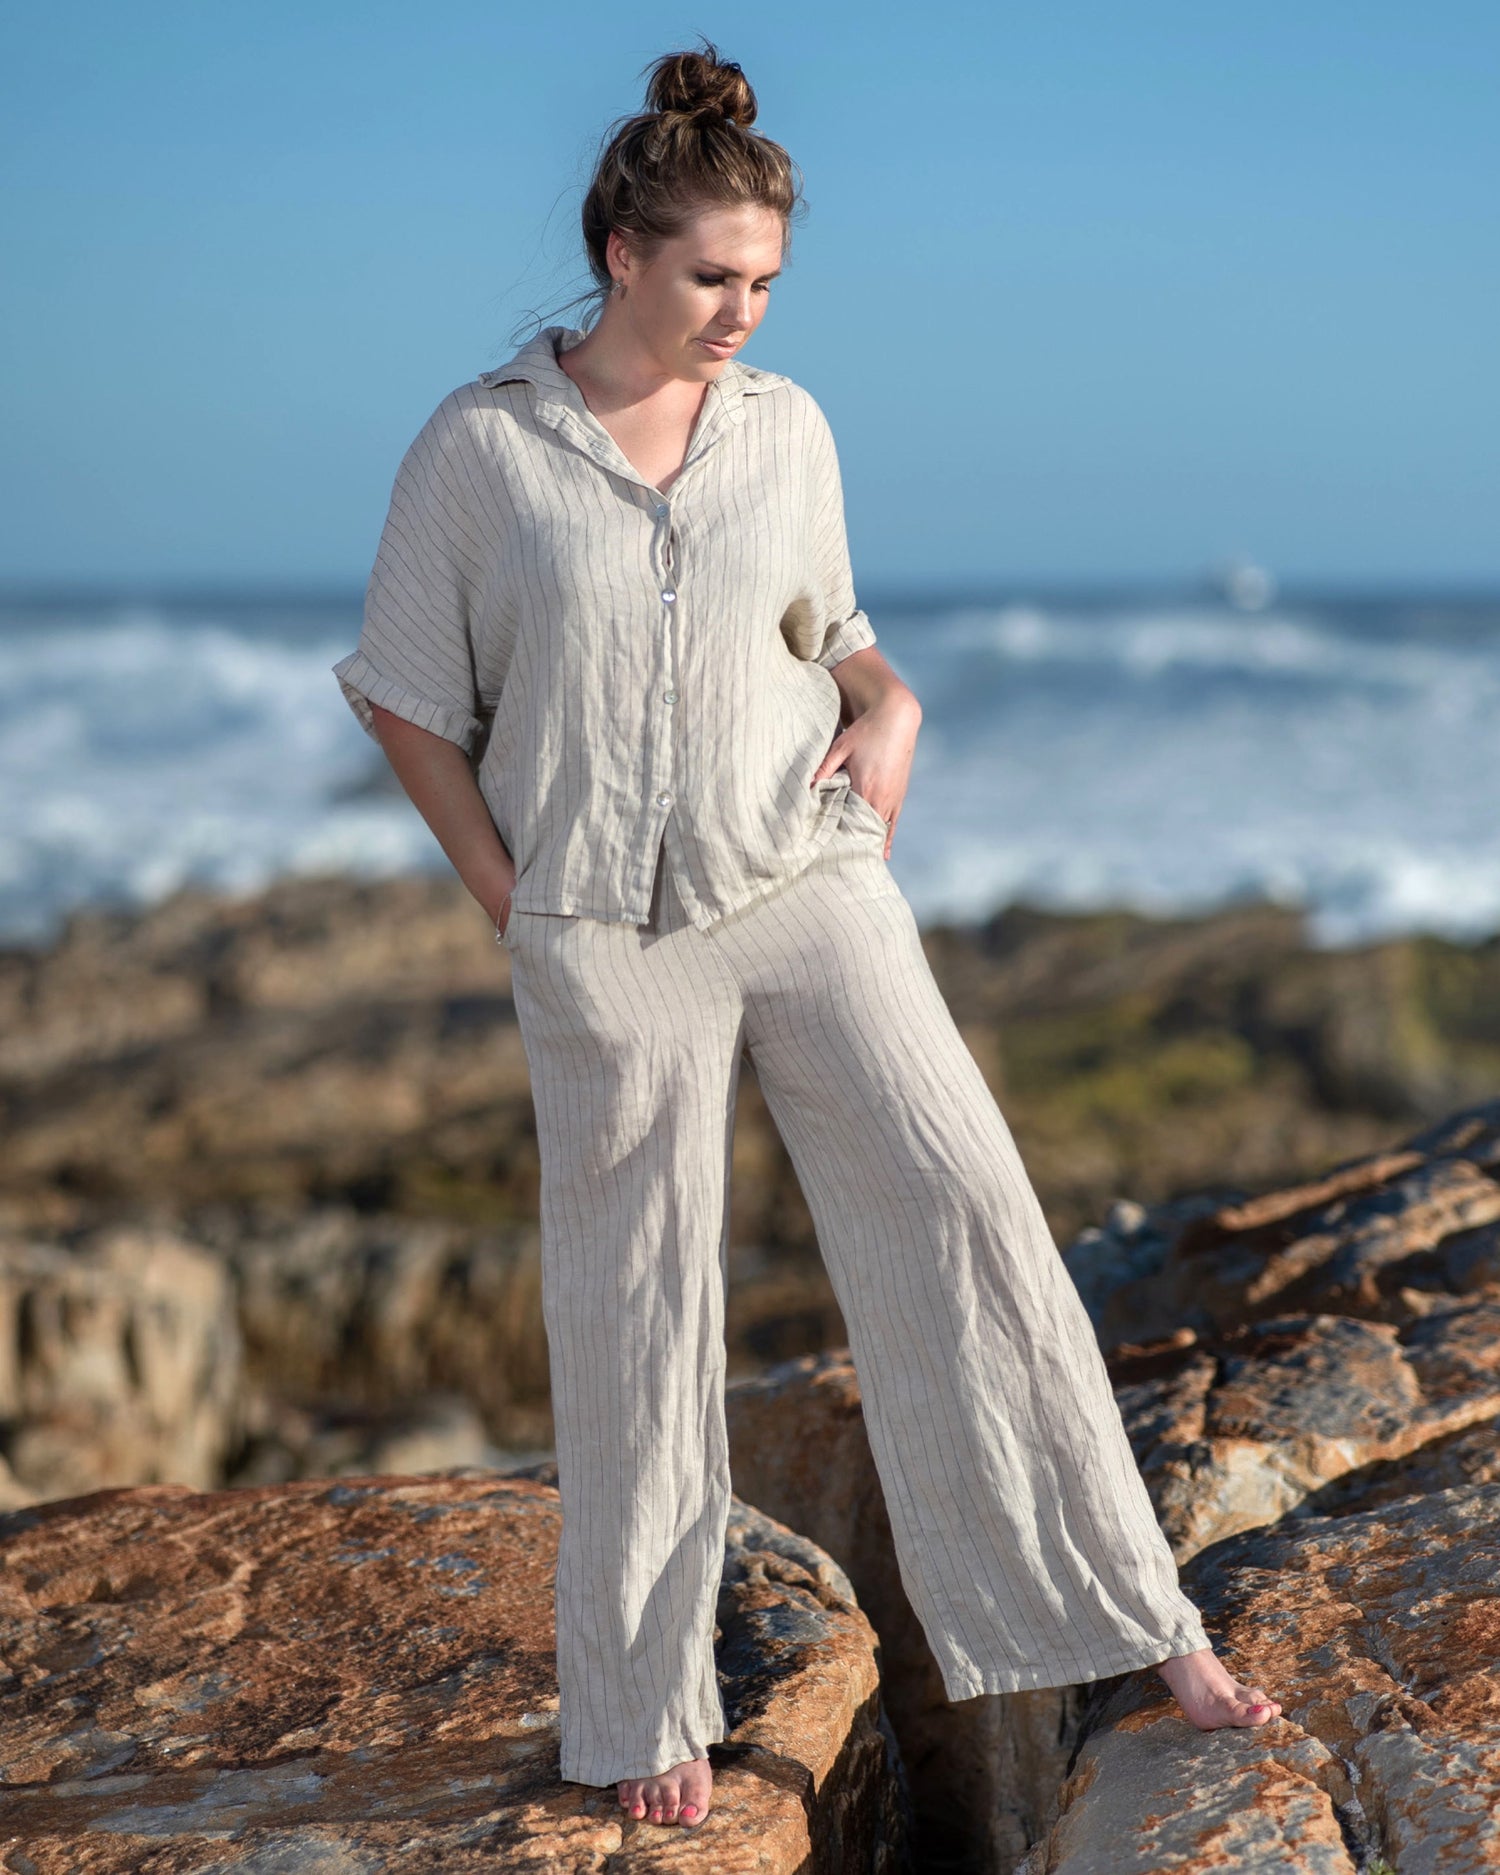 The top's relaxed yet tailored cut flatters your figure without feeling restrictive. Crafted from premium linen, this top offers the ultimate in comfort for warm days. Perfect for an on-the-go look